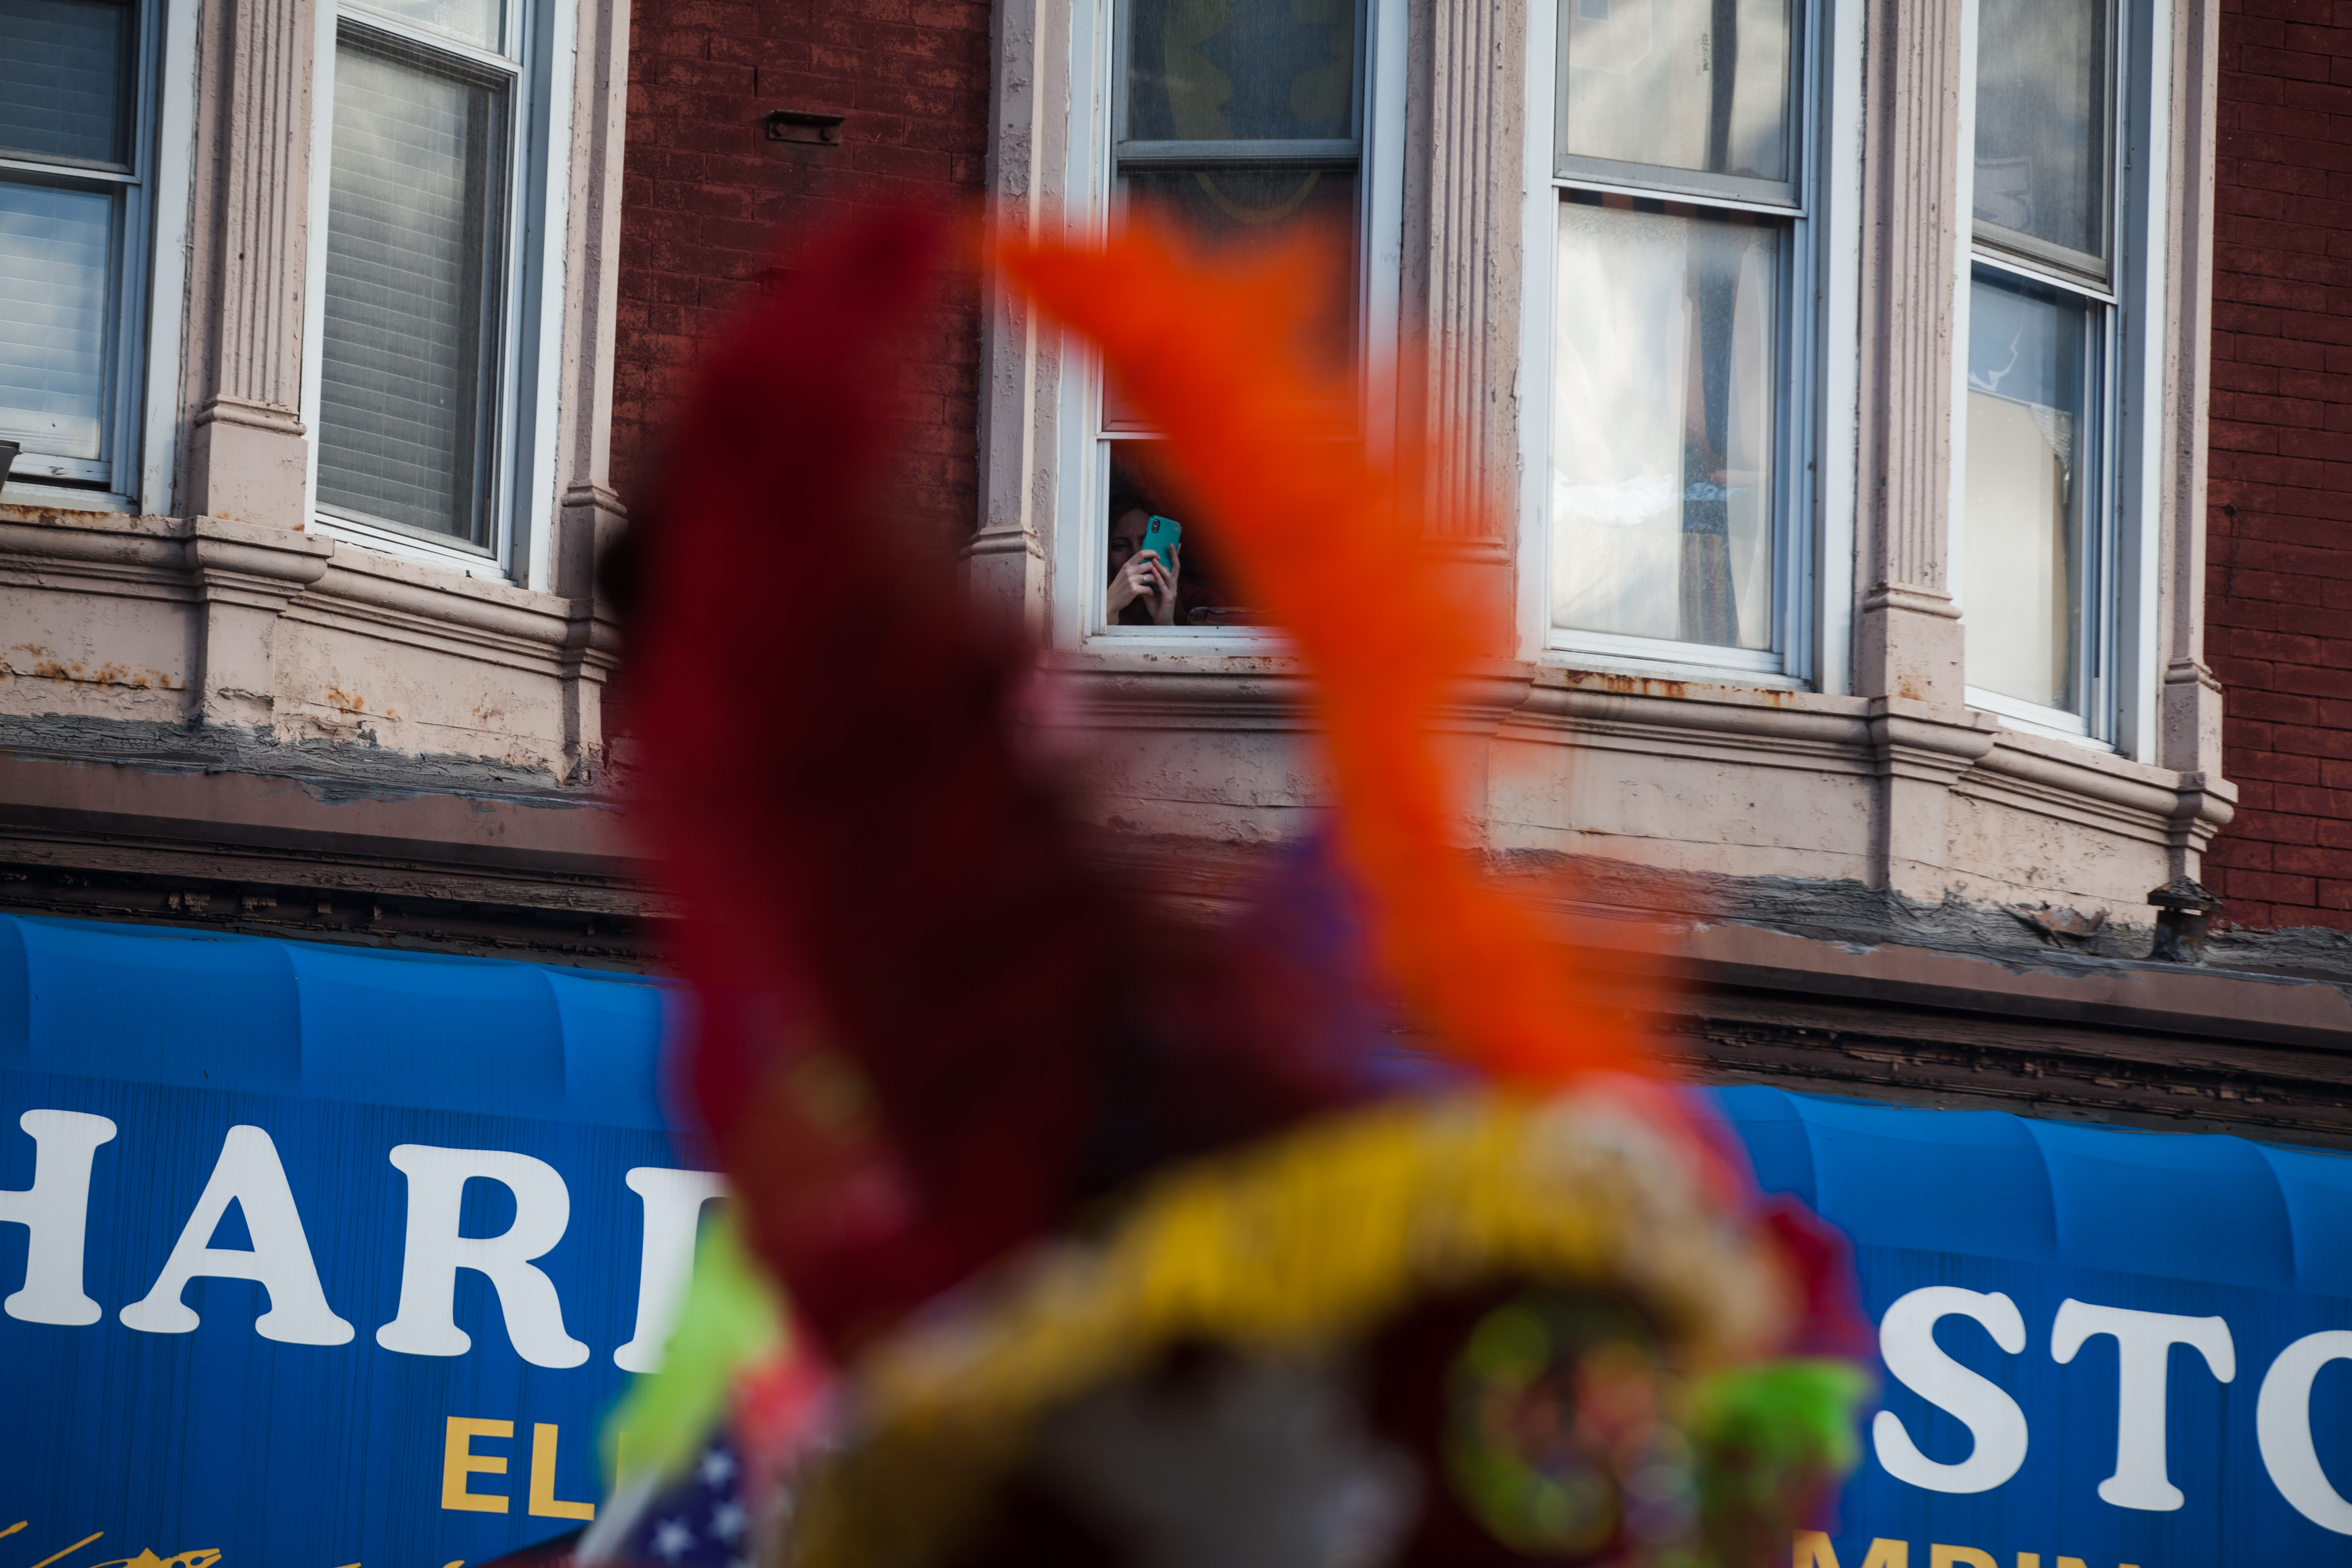 Neighbors on Graham Avenue were quick to point their phones to the street to film the parade.